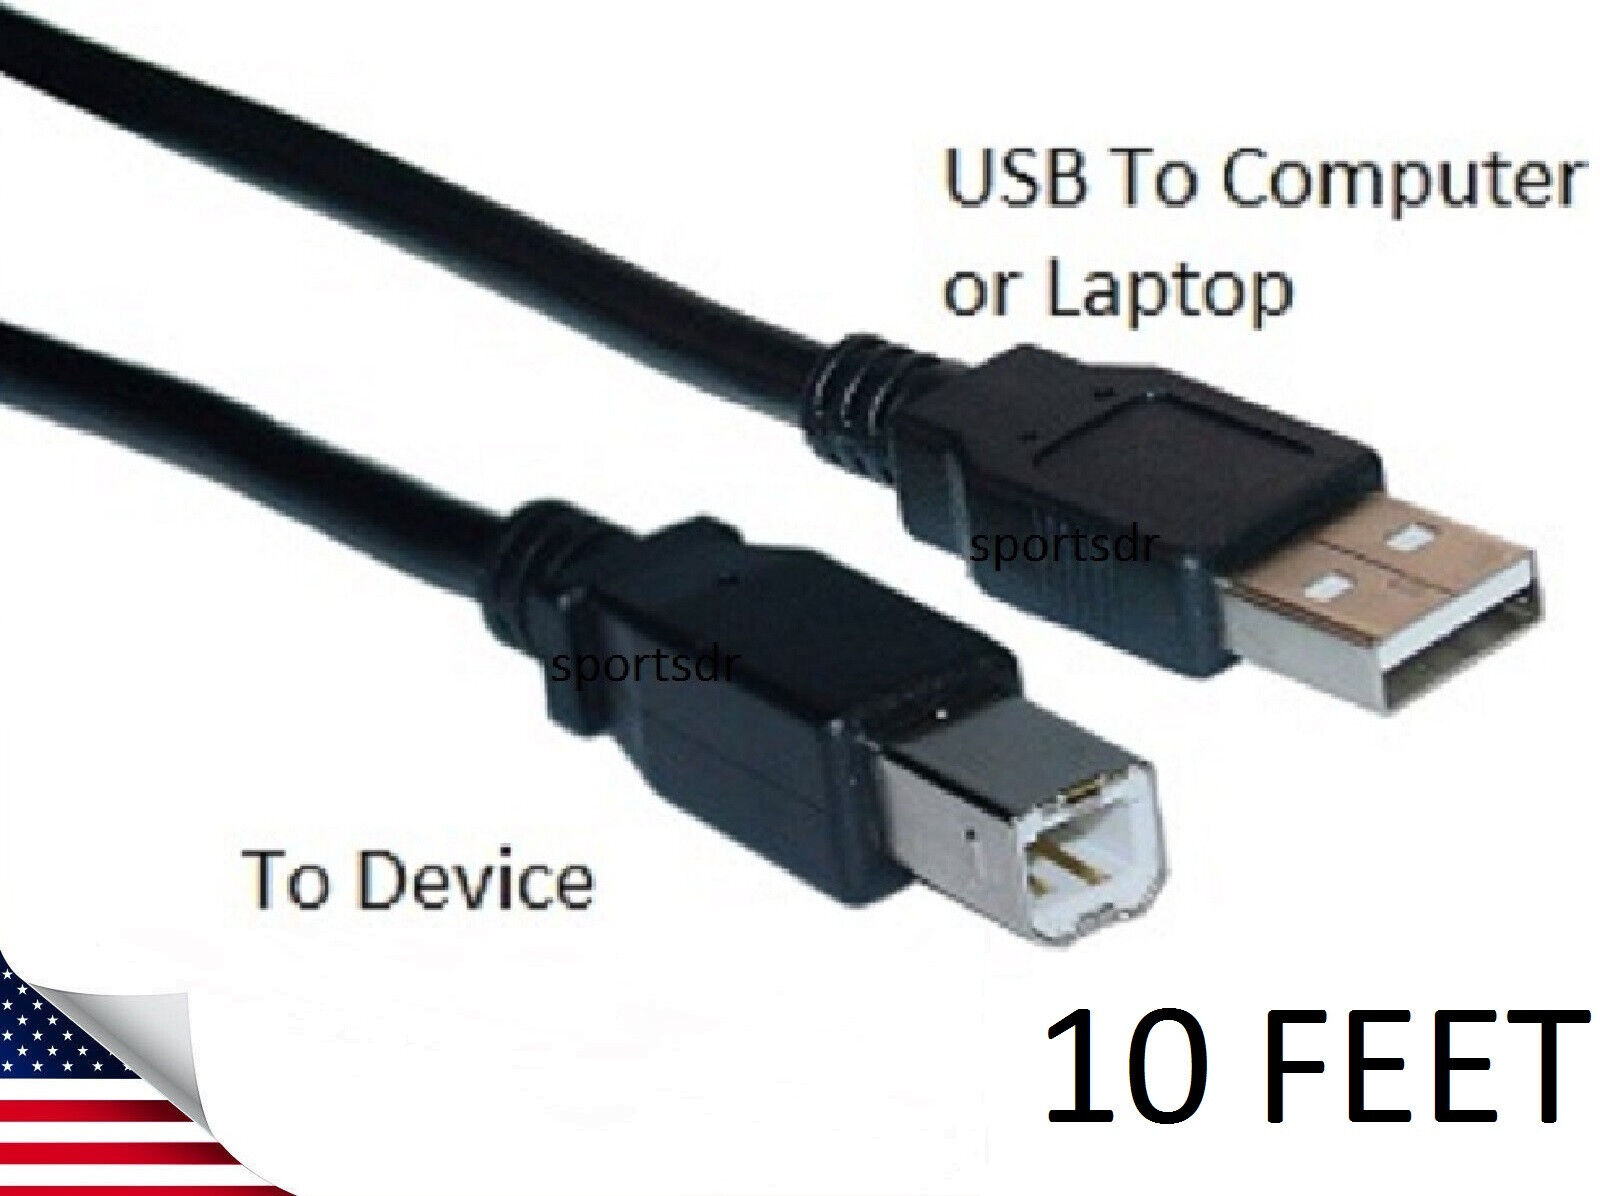 USB LONG Data Cord Plug Cable for ION Archive LP Vinyl Record Player Turntable